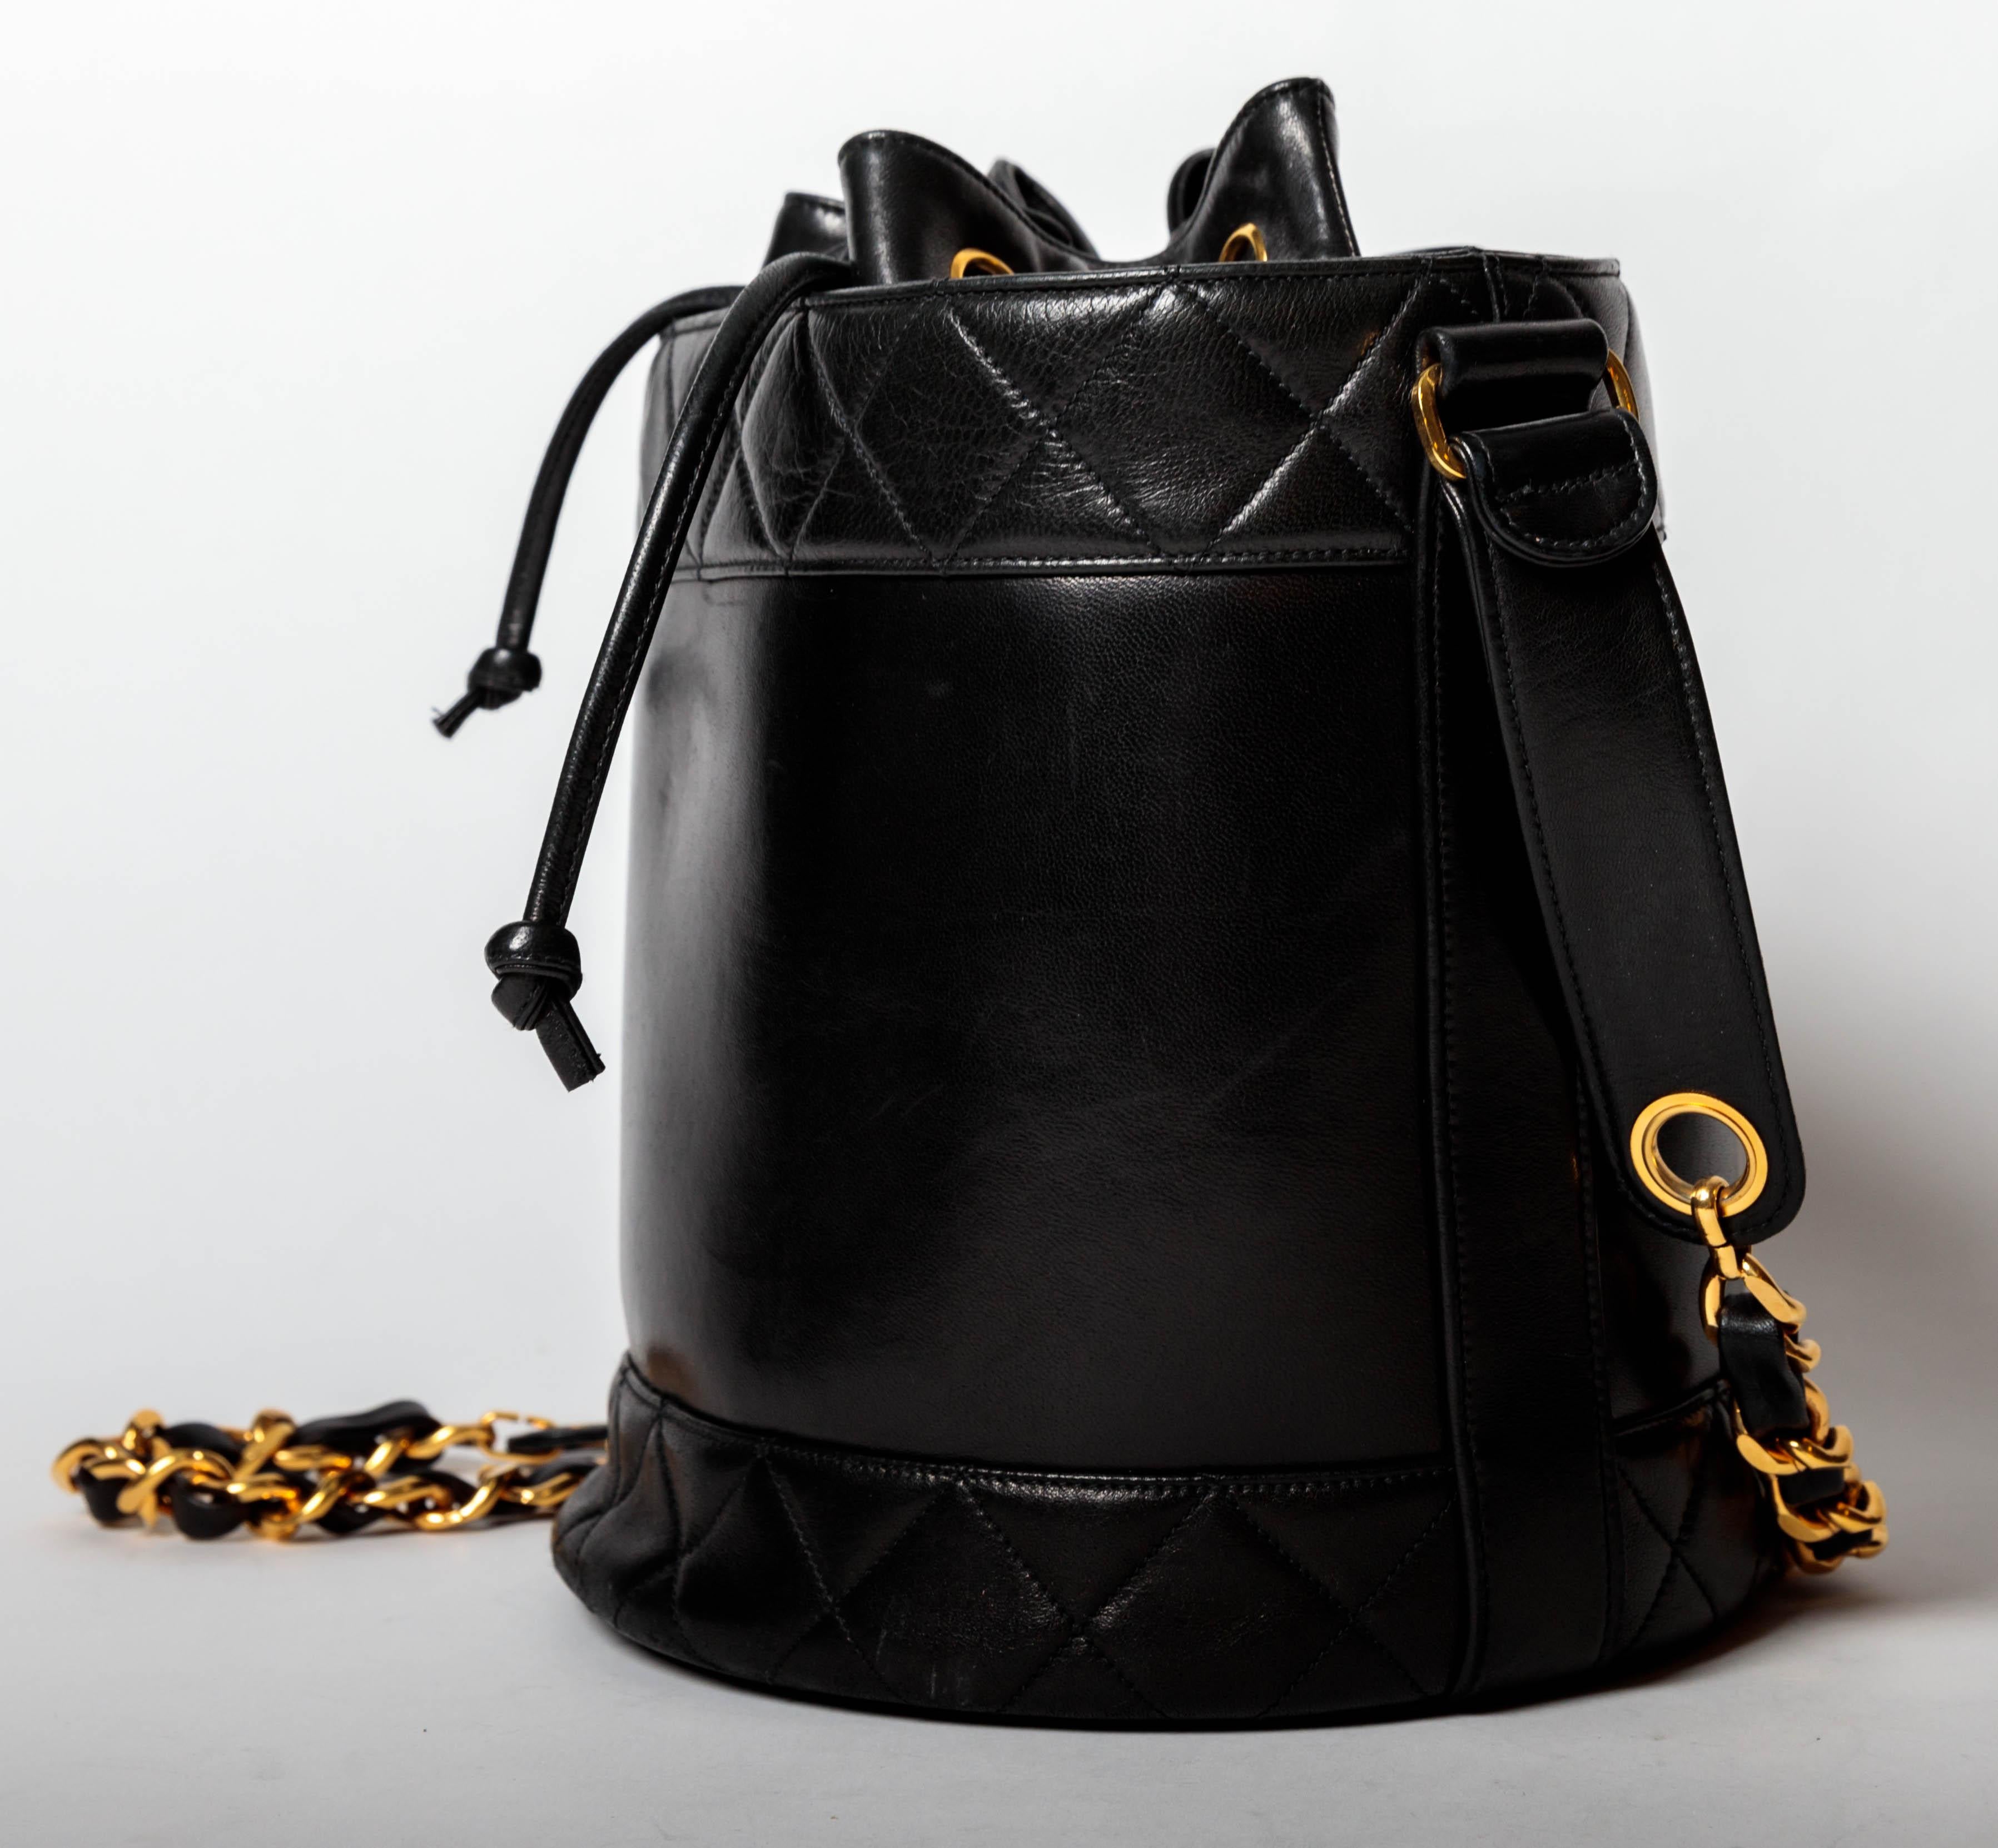 Chanel Black Lambskin Bucket Bag with Gold Hardware  In Excellent Condition For Sale In Westhampton Beach, NY